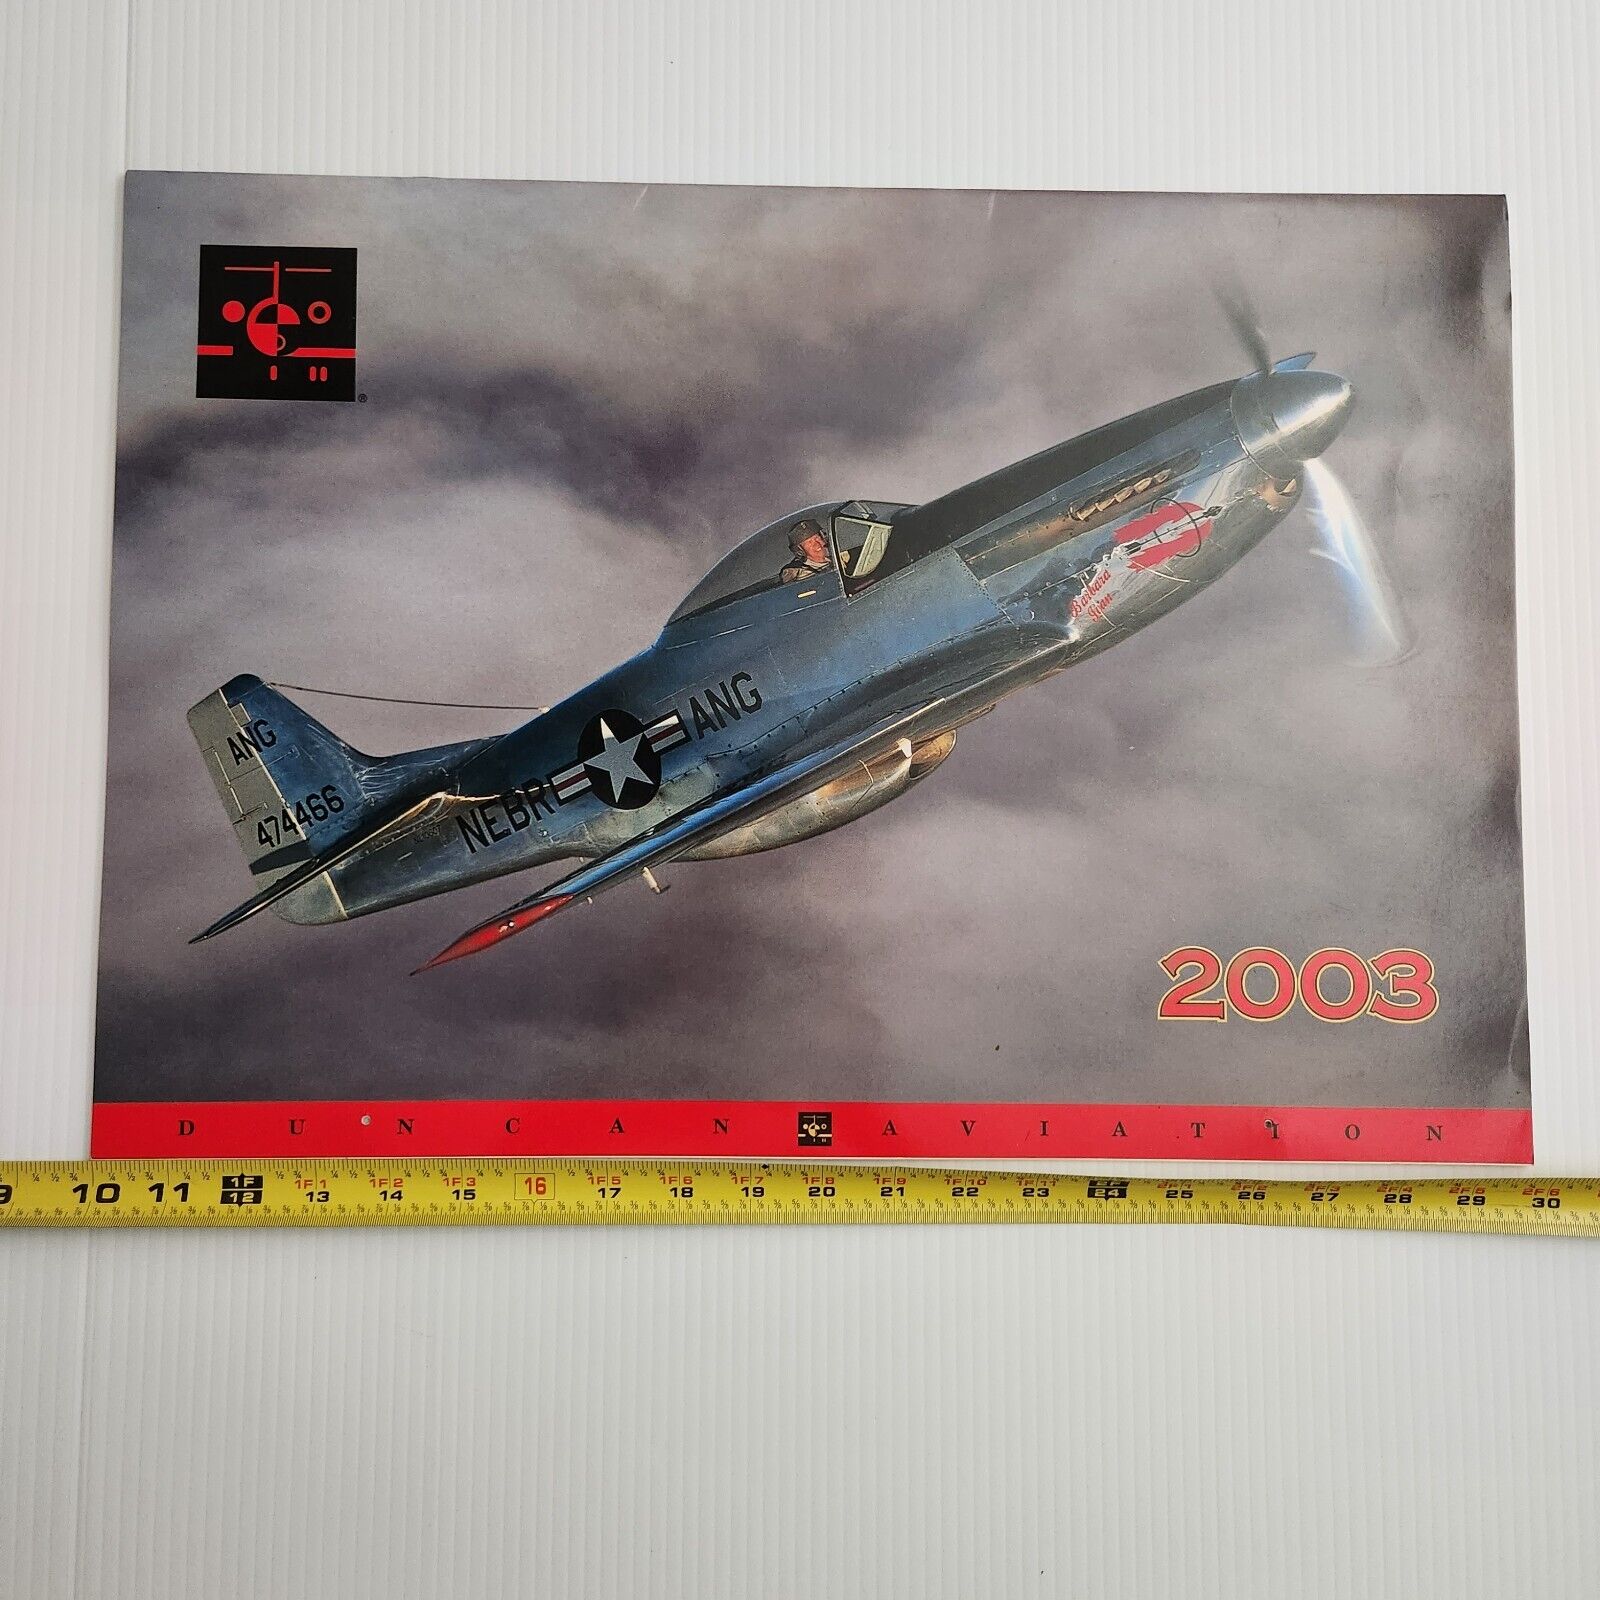 Duncan Aviation Calendar Ghosts A Time Remembered  14 x 20 Aviation 2003